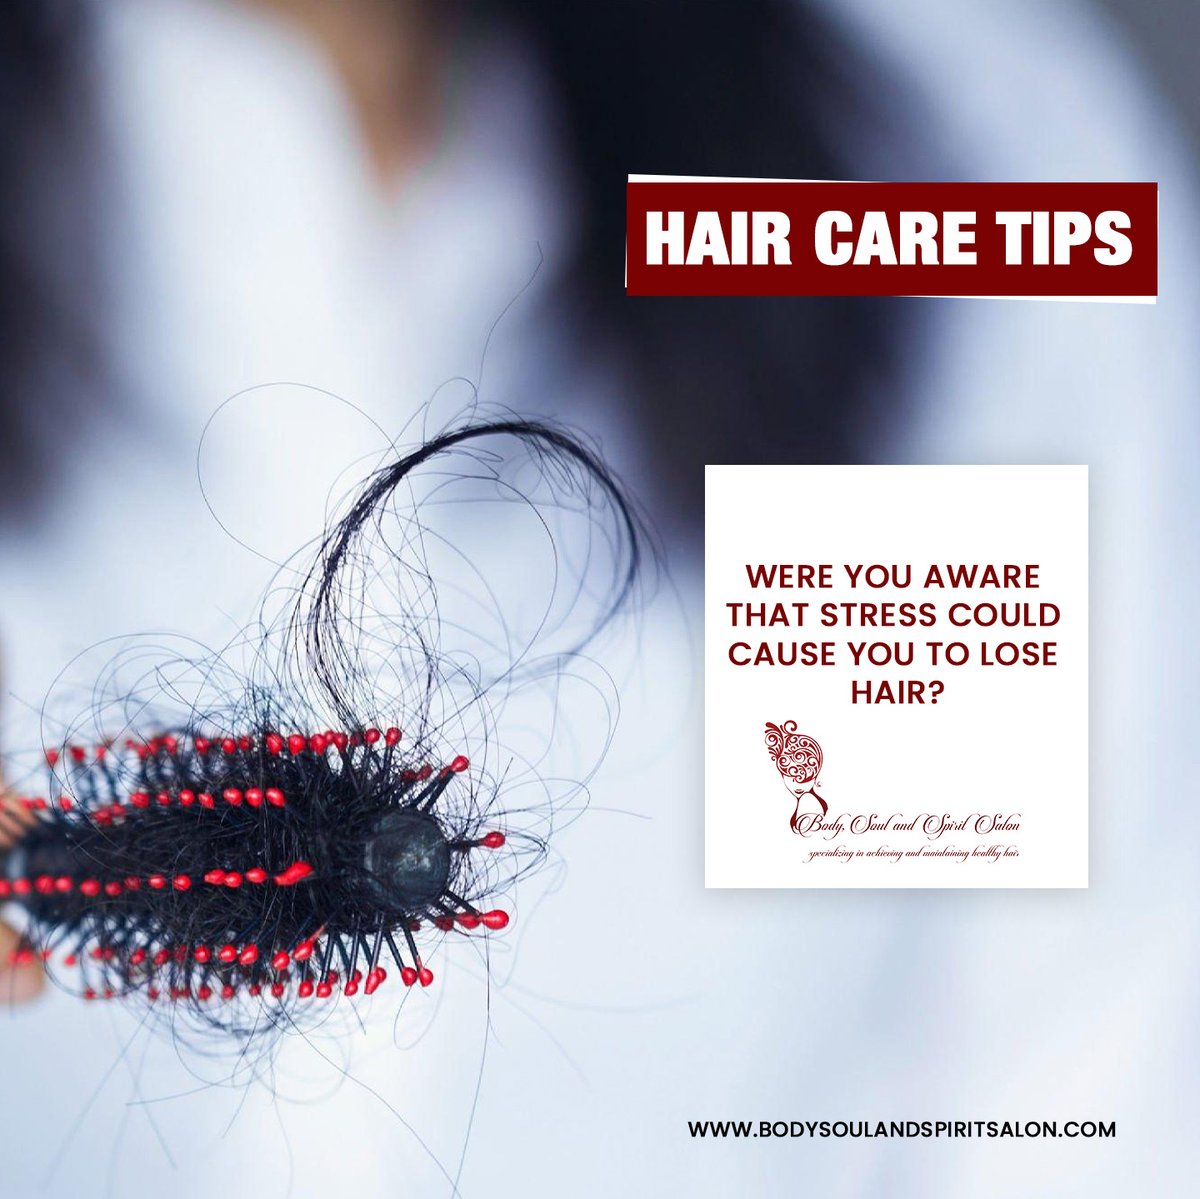 Hair Care Tips: 

Were you aware that stress could cause you to lose hair?

#HairCareTips #BodySoulSpirit #DidYouKnow #HairGoals #HairCare #HealthyHair